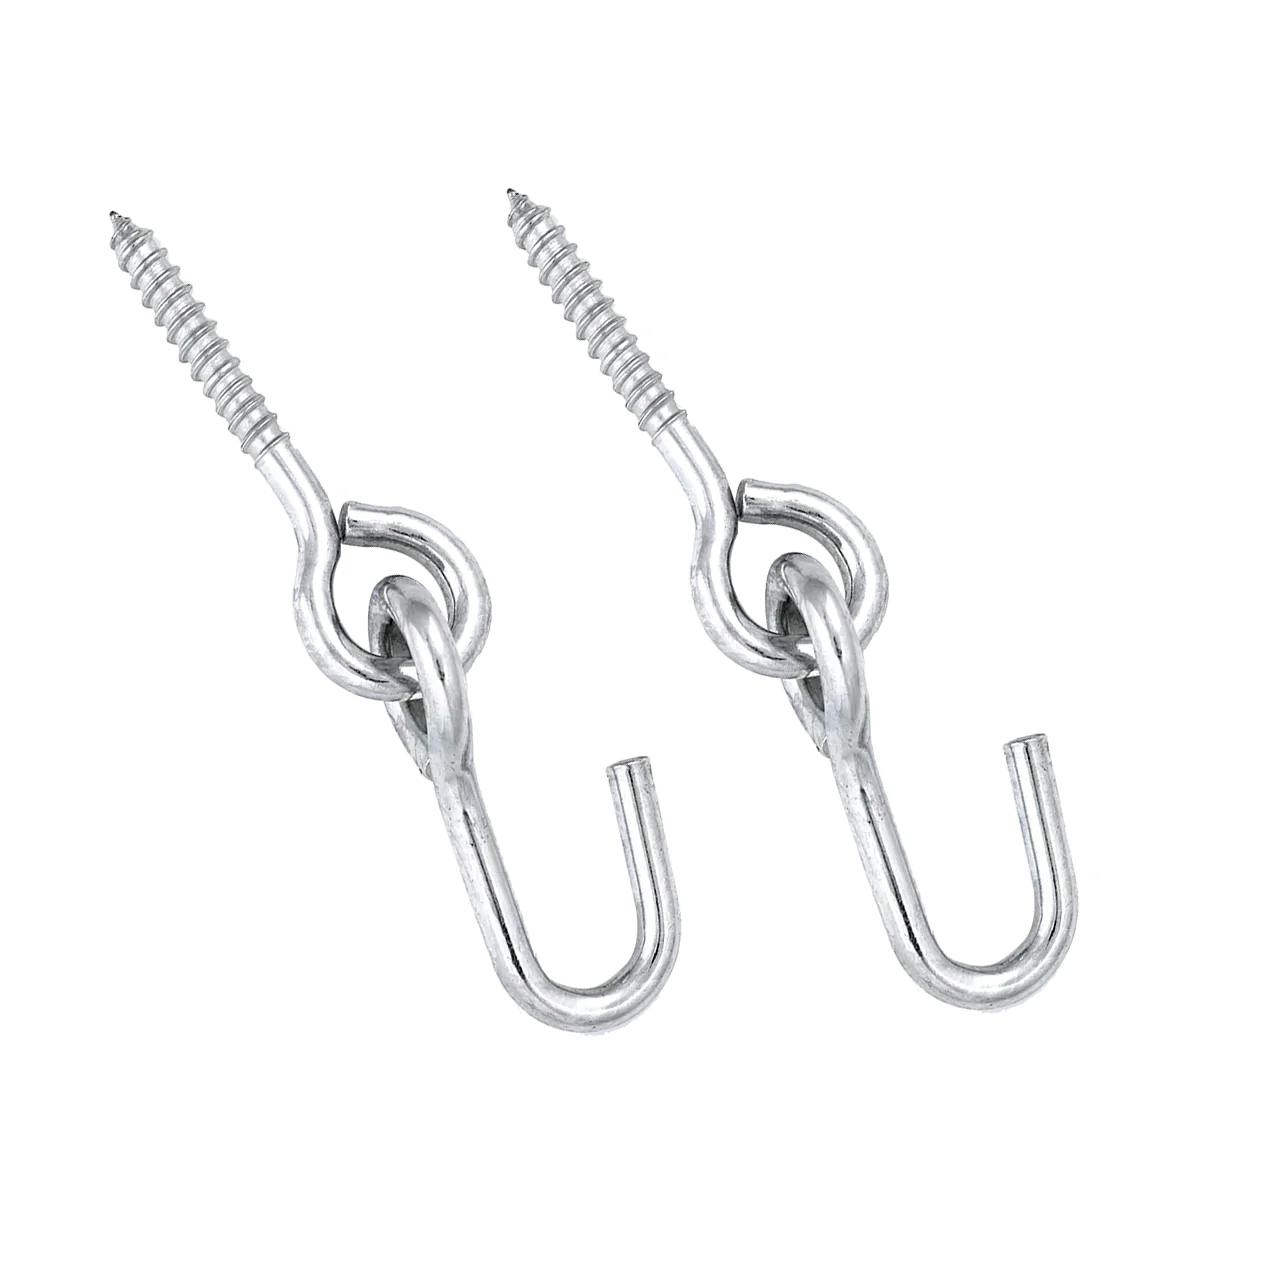 2pcs 5Inch Plated Screw Eyes Hook & 2pcs 8mm Snap Hooks, Heavy Duty Screw in Eye Hooks for Securing Cable Wires, Hammock Stand, Indoor & Outdoor Use